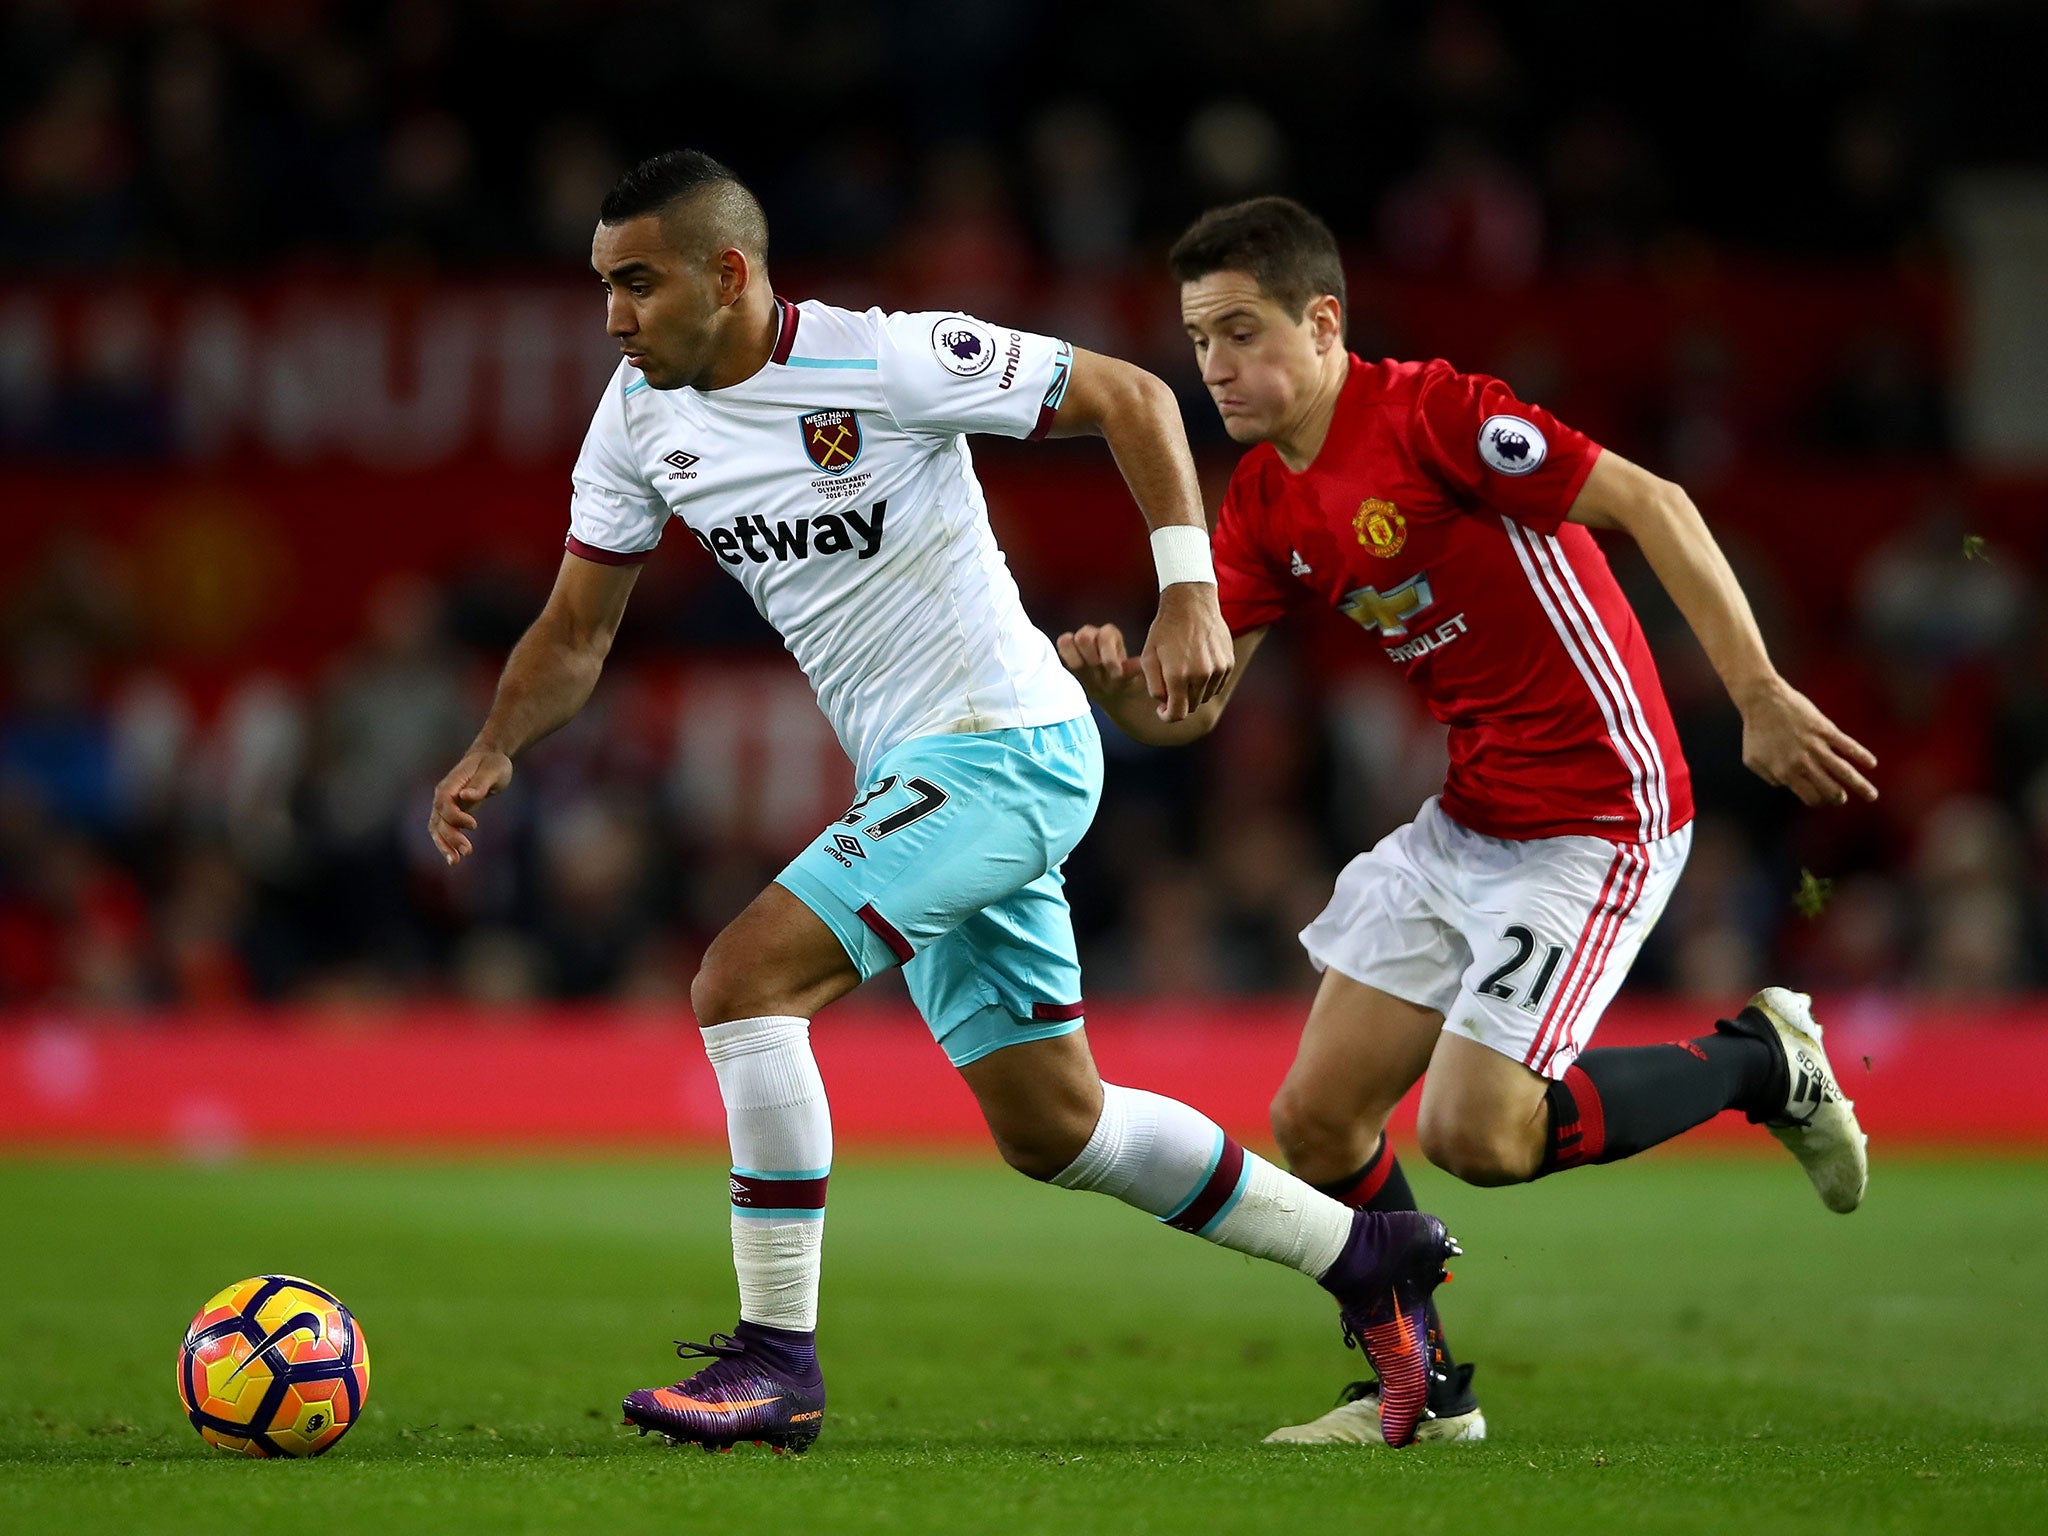 Dimitri Payet looks to get away from Ander Herrera during last Sunday's clash between United and West Ham at Old Trafford